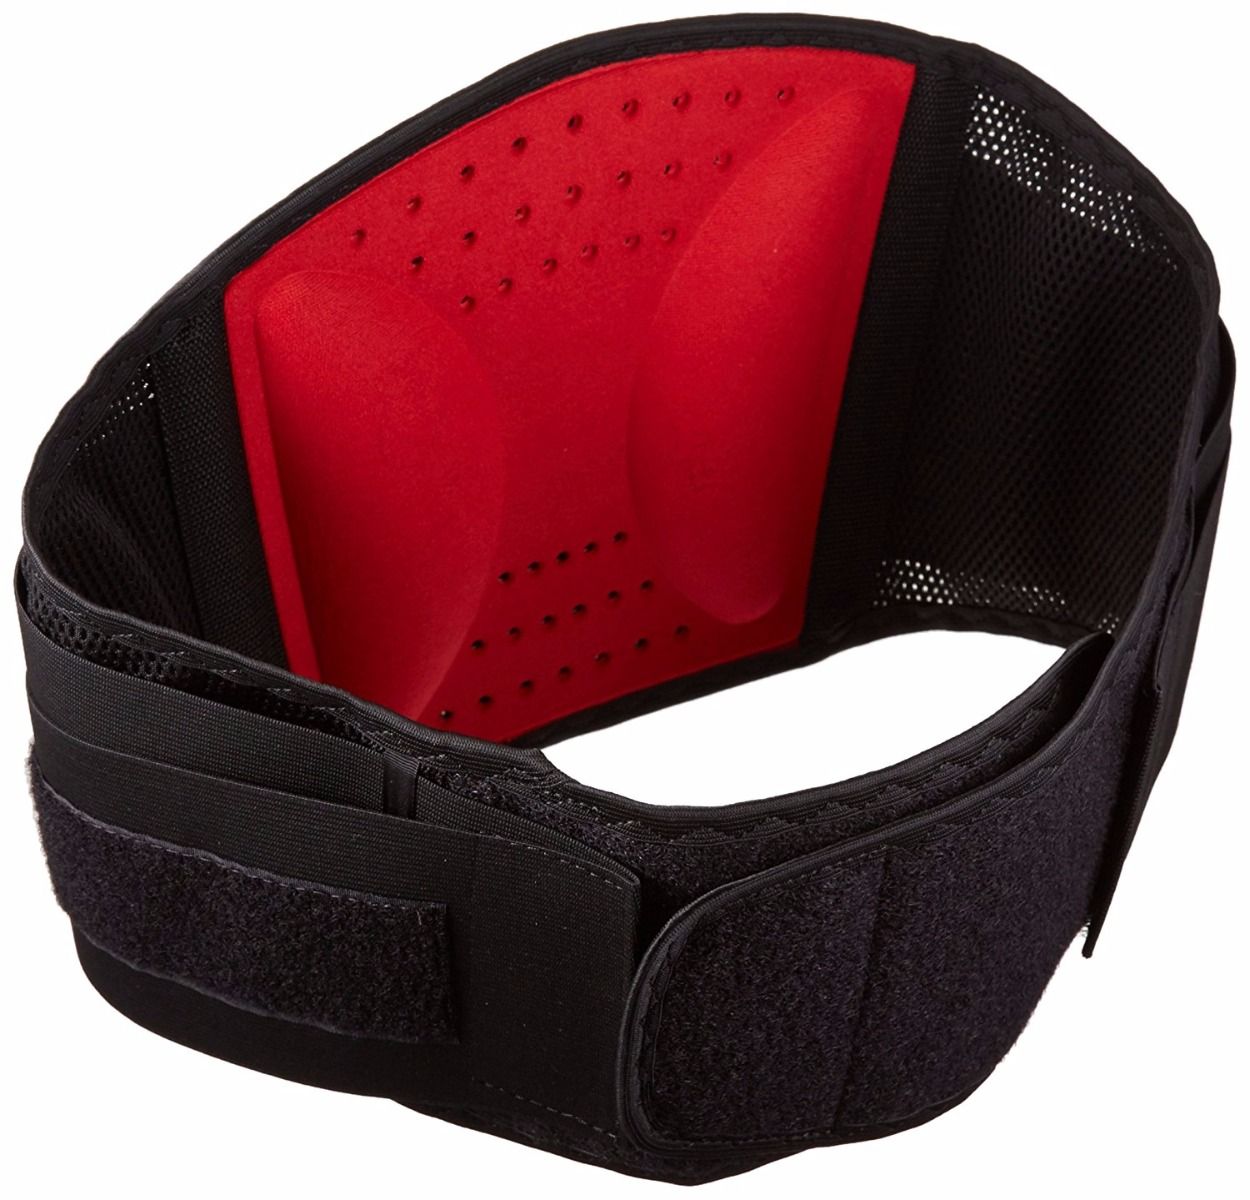 The Best Back Brace for Pain Relief